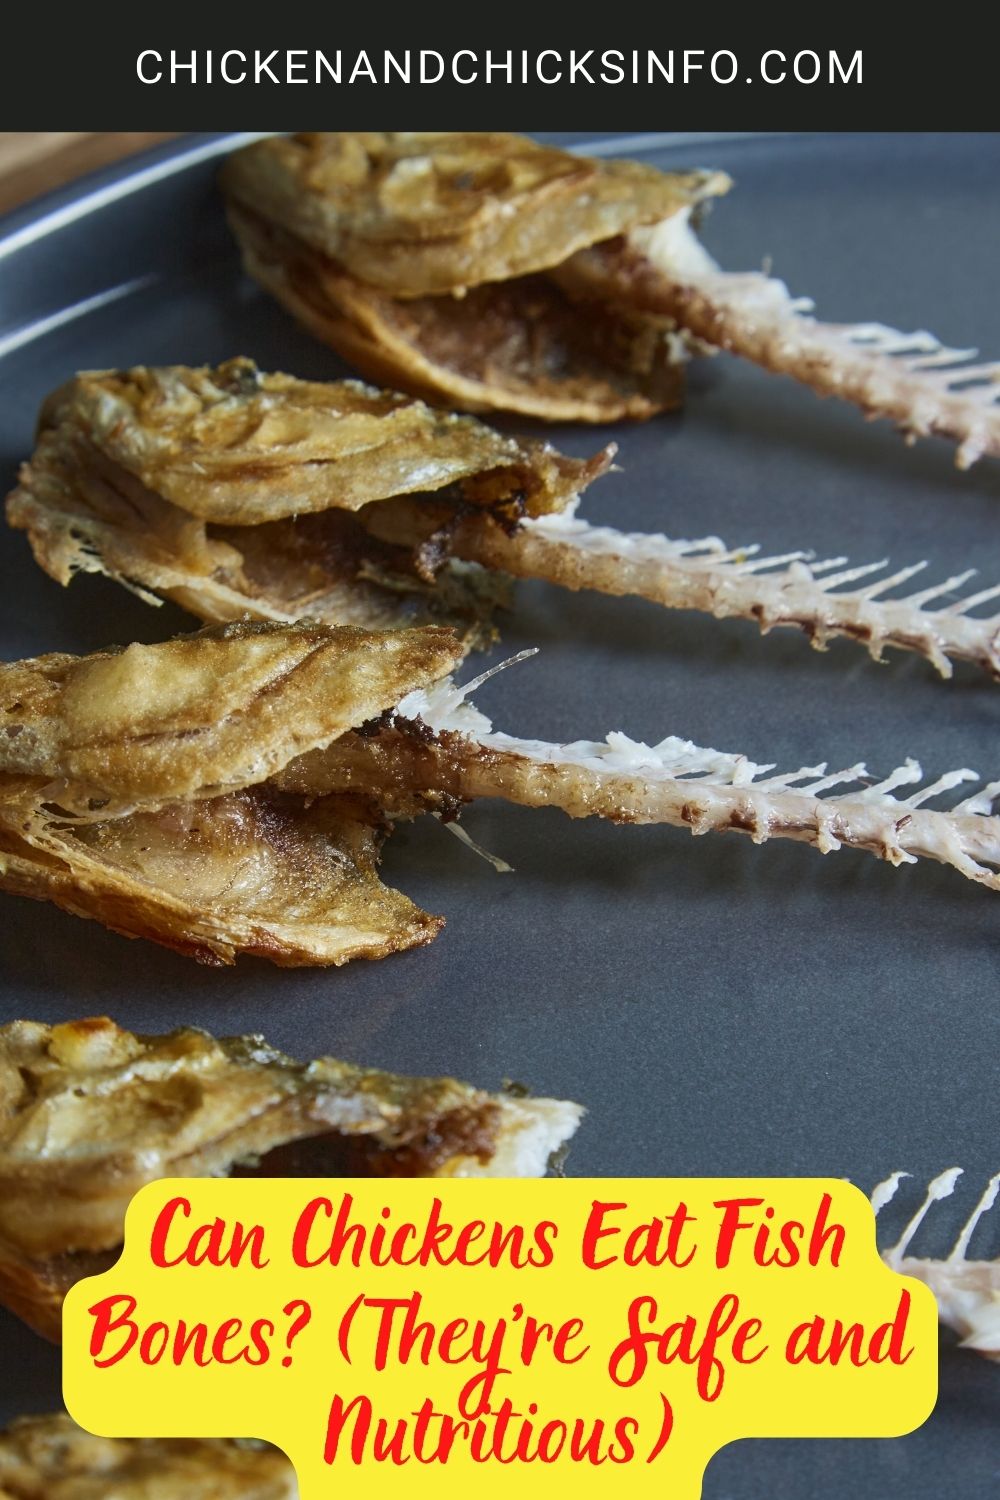 Can Chickens Eat Fish Bones? (They're Safe and Nutritious) poster.
